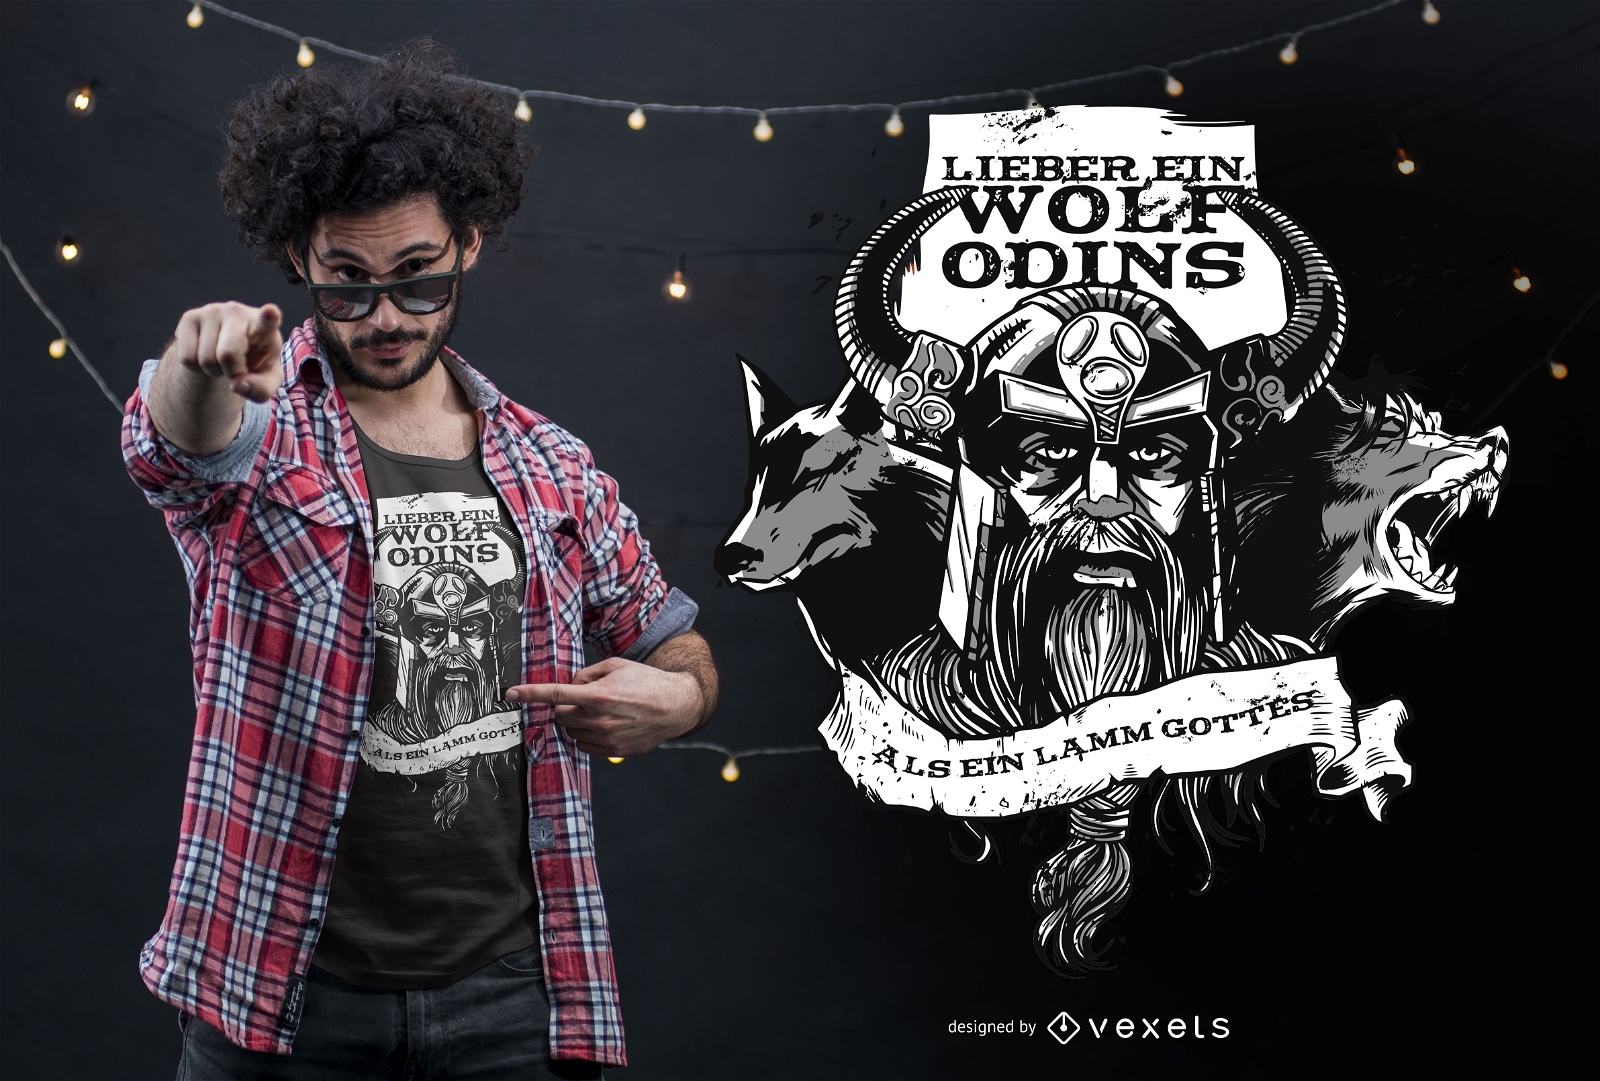 Odin's Wolf German Quote T-shirt Design